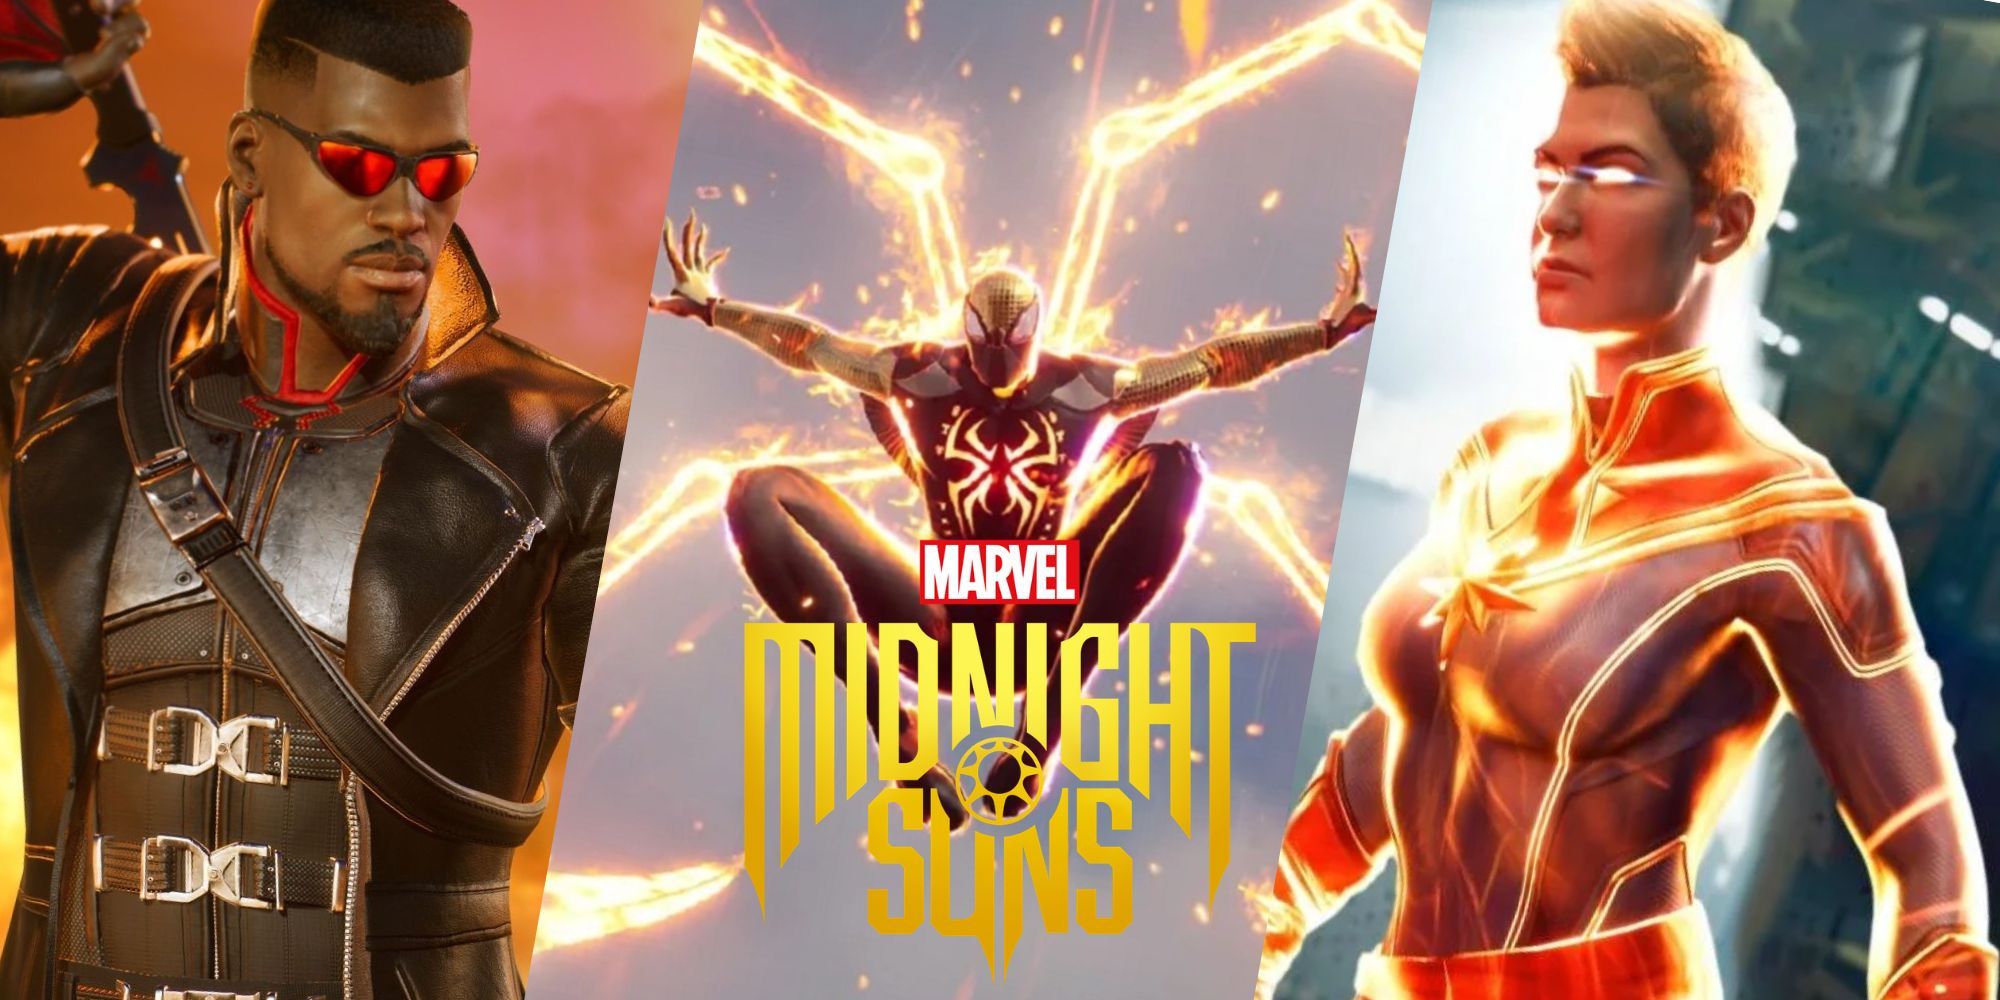 A month after release, Marvel's Midnight Suns is 33% off on all